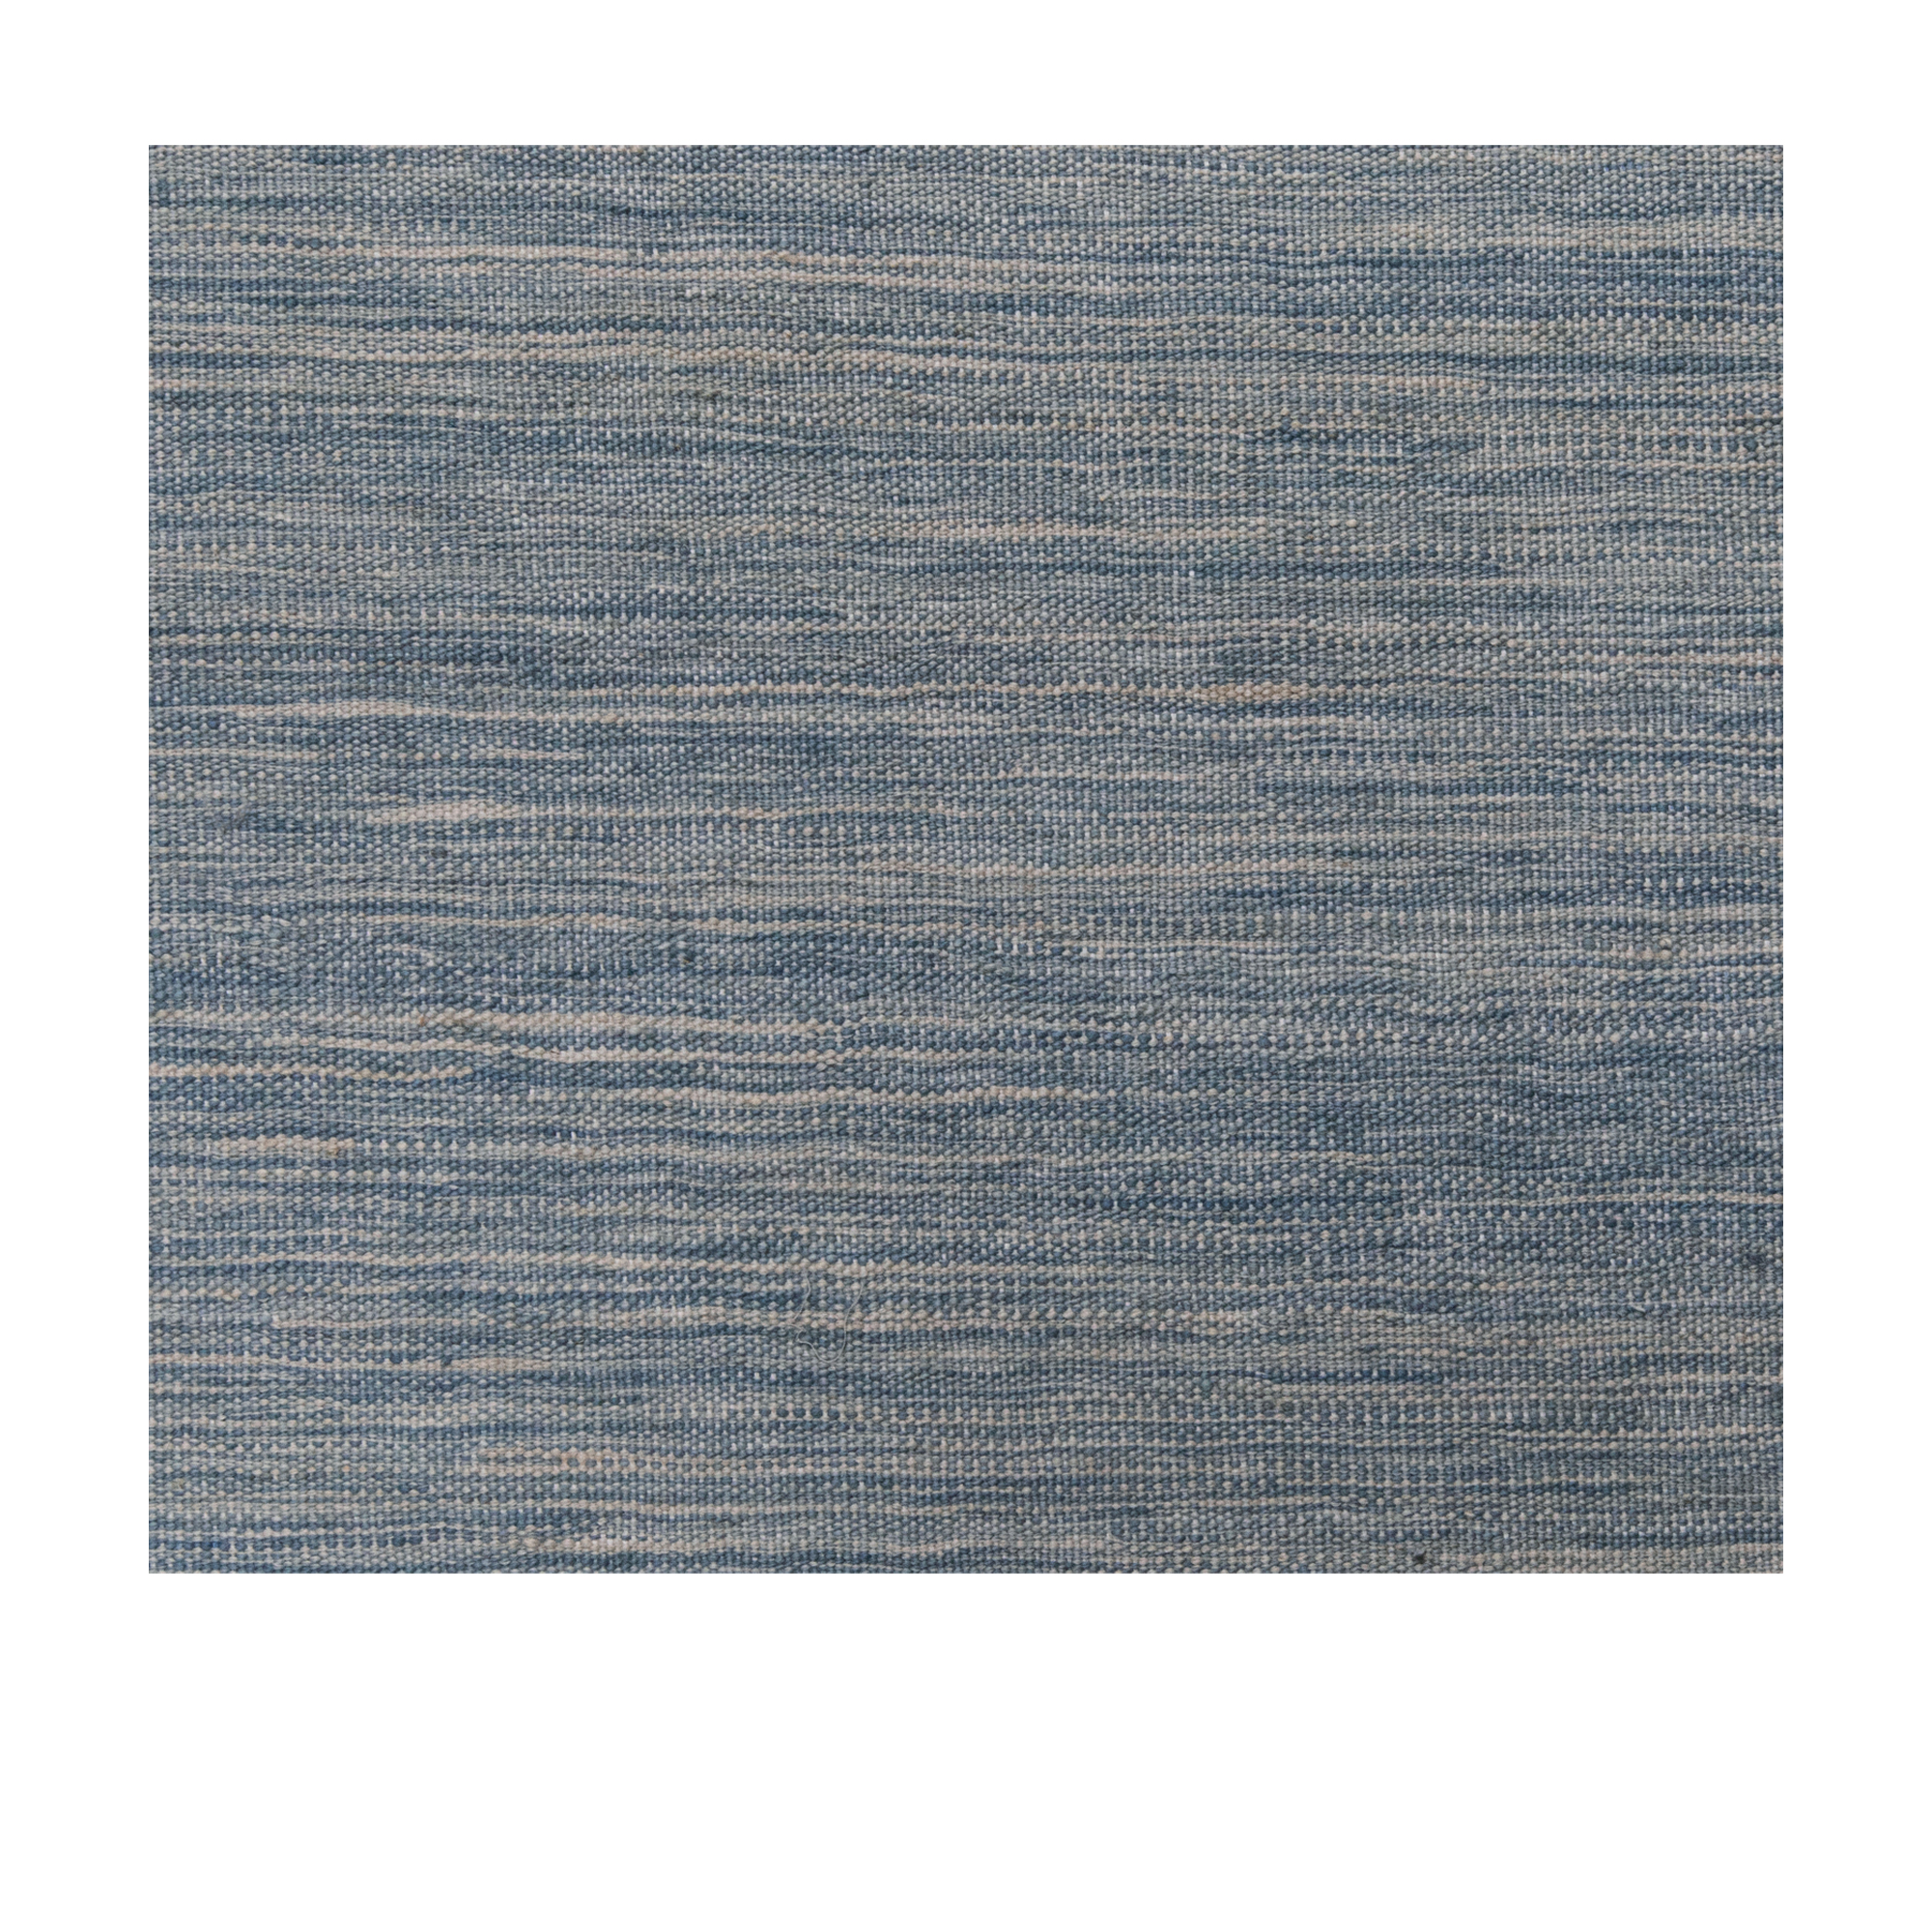 This Mazandaran flatweave is handwoven and made of 100% wool.